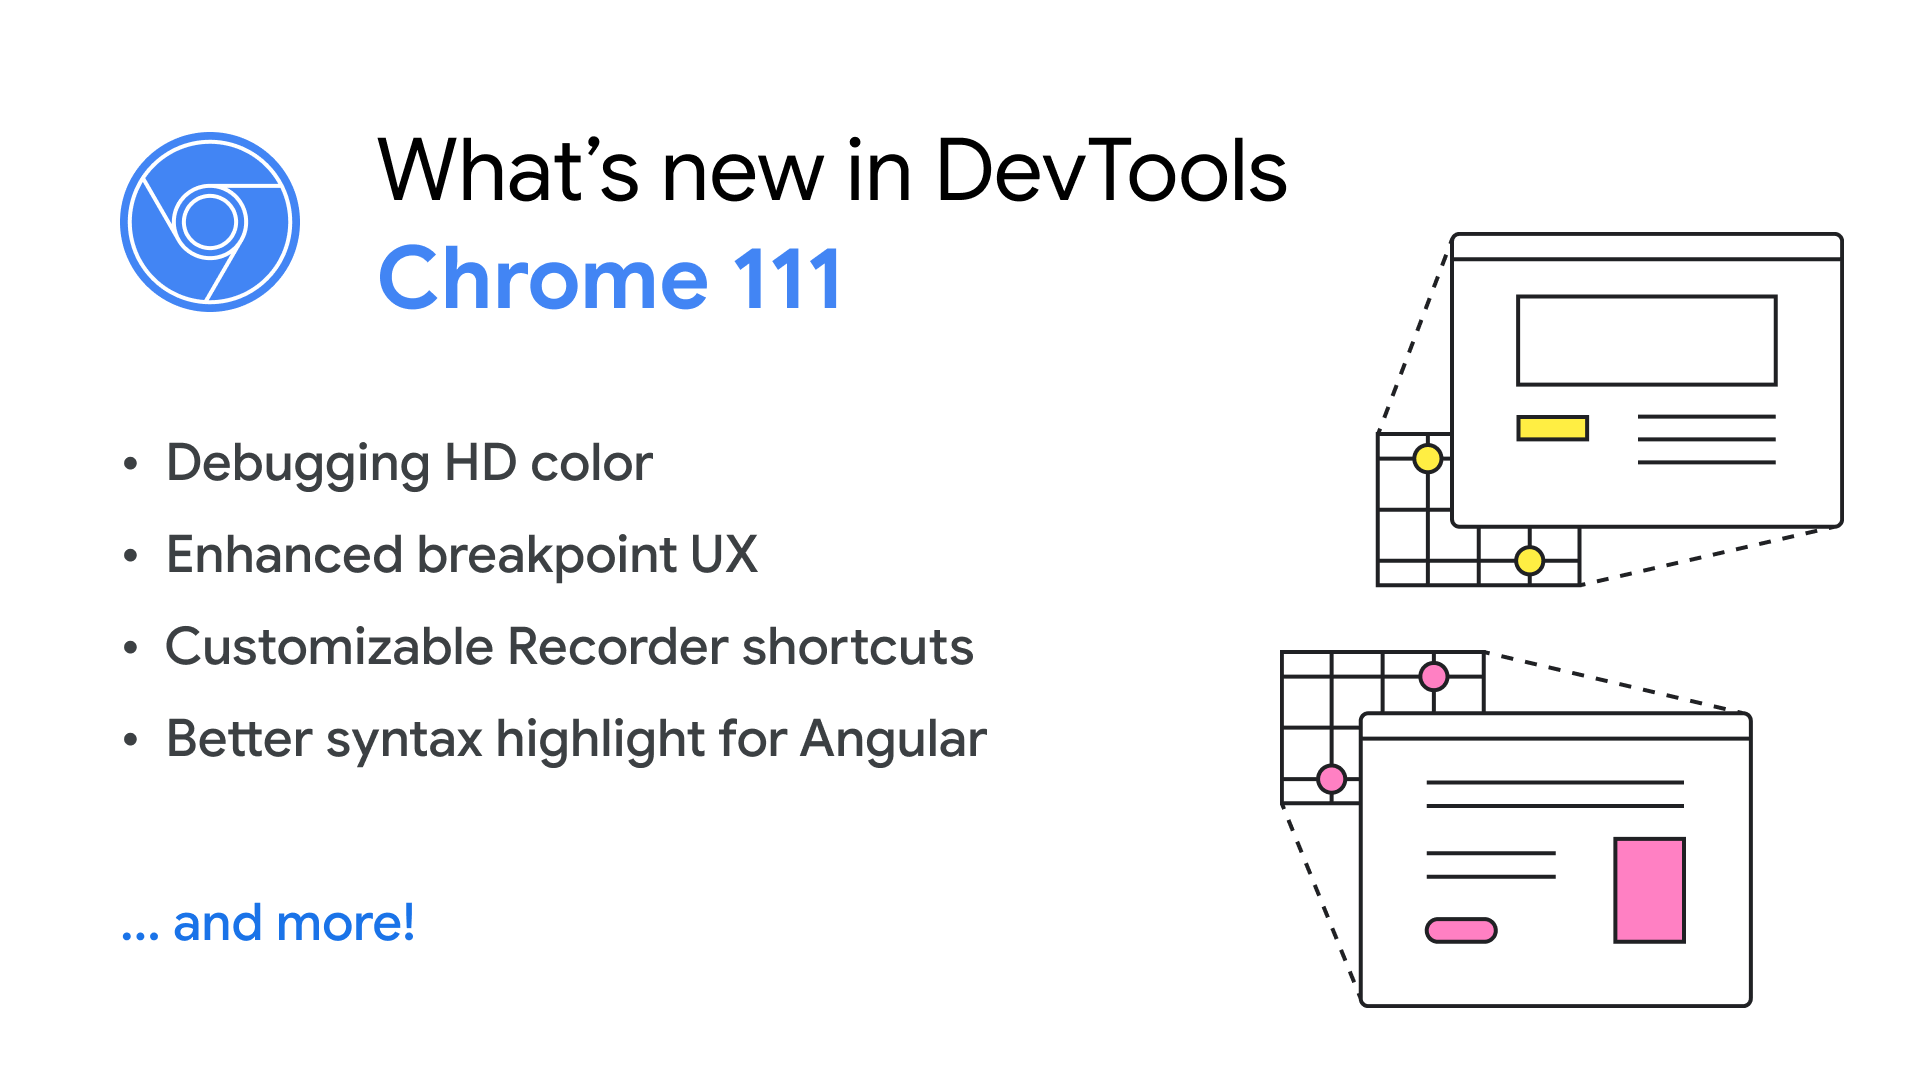 Chrome DevTools on Twitter: "Chrome 111 is here and it comes with exciting new features for DevTools! 🌈 Debugging HD Color 📍 Enhanced debugging UX 🅰️ Better syntax highlight for Angular